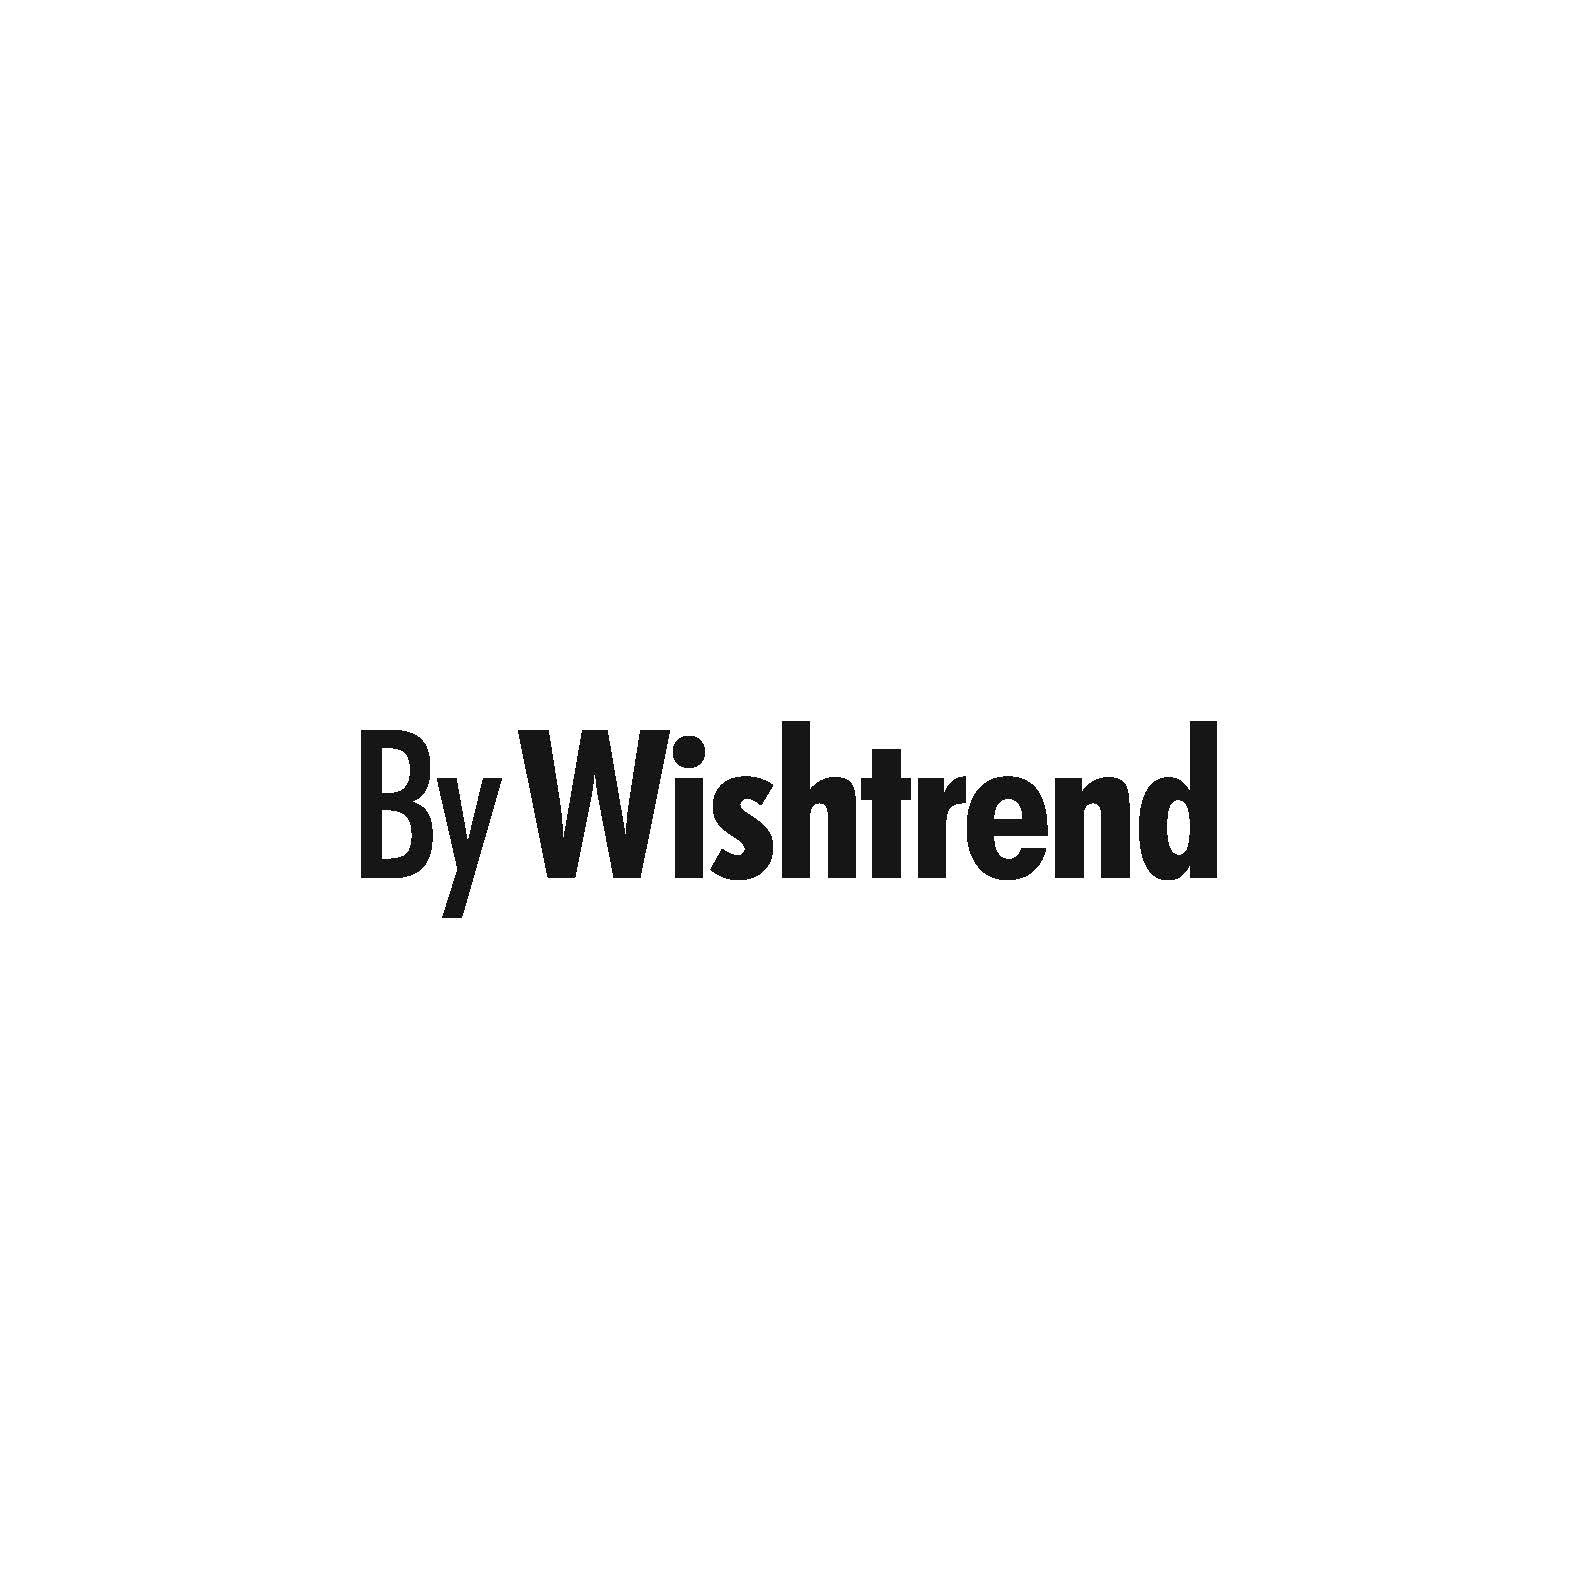 By Wishtrend